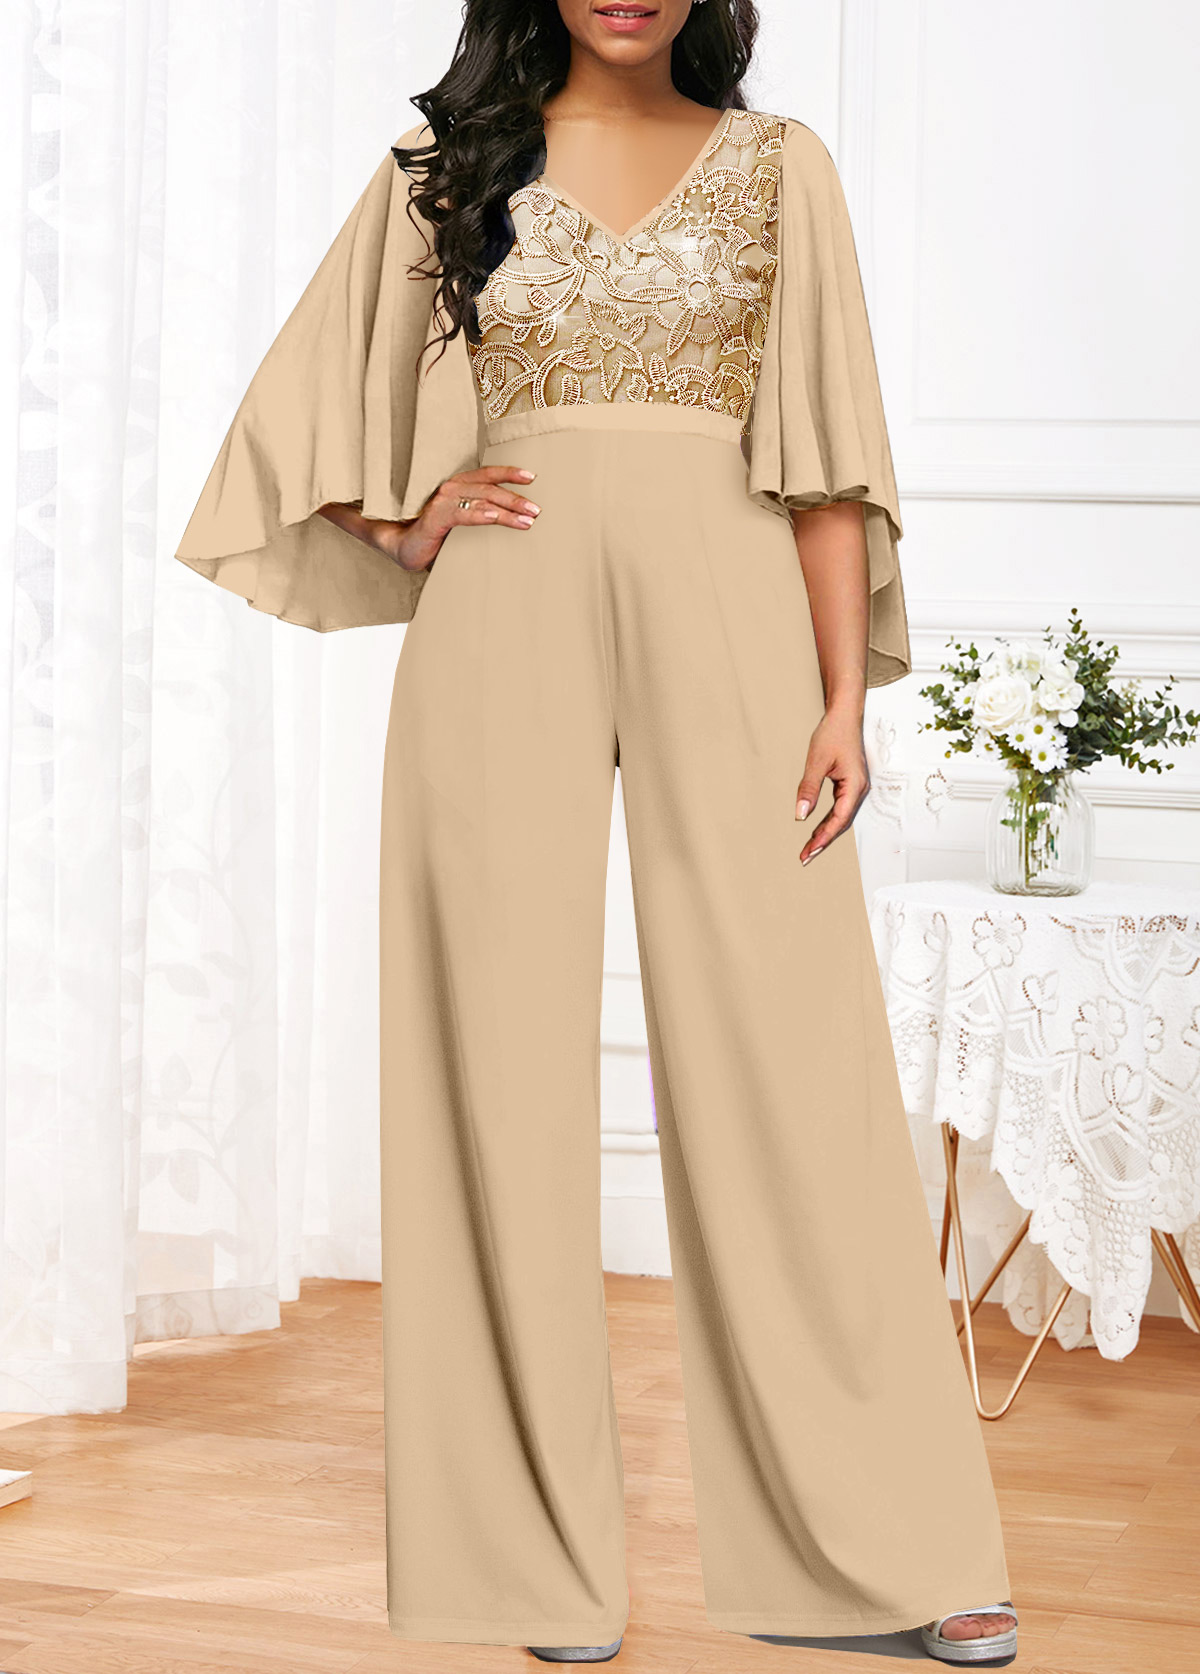 ROTITA Embroidery Long V Neck 3/4 Sleeve Champagne Jumpsuit